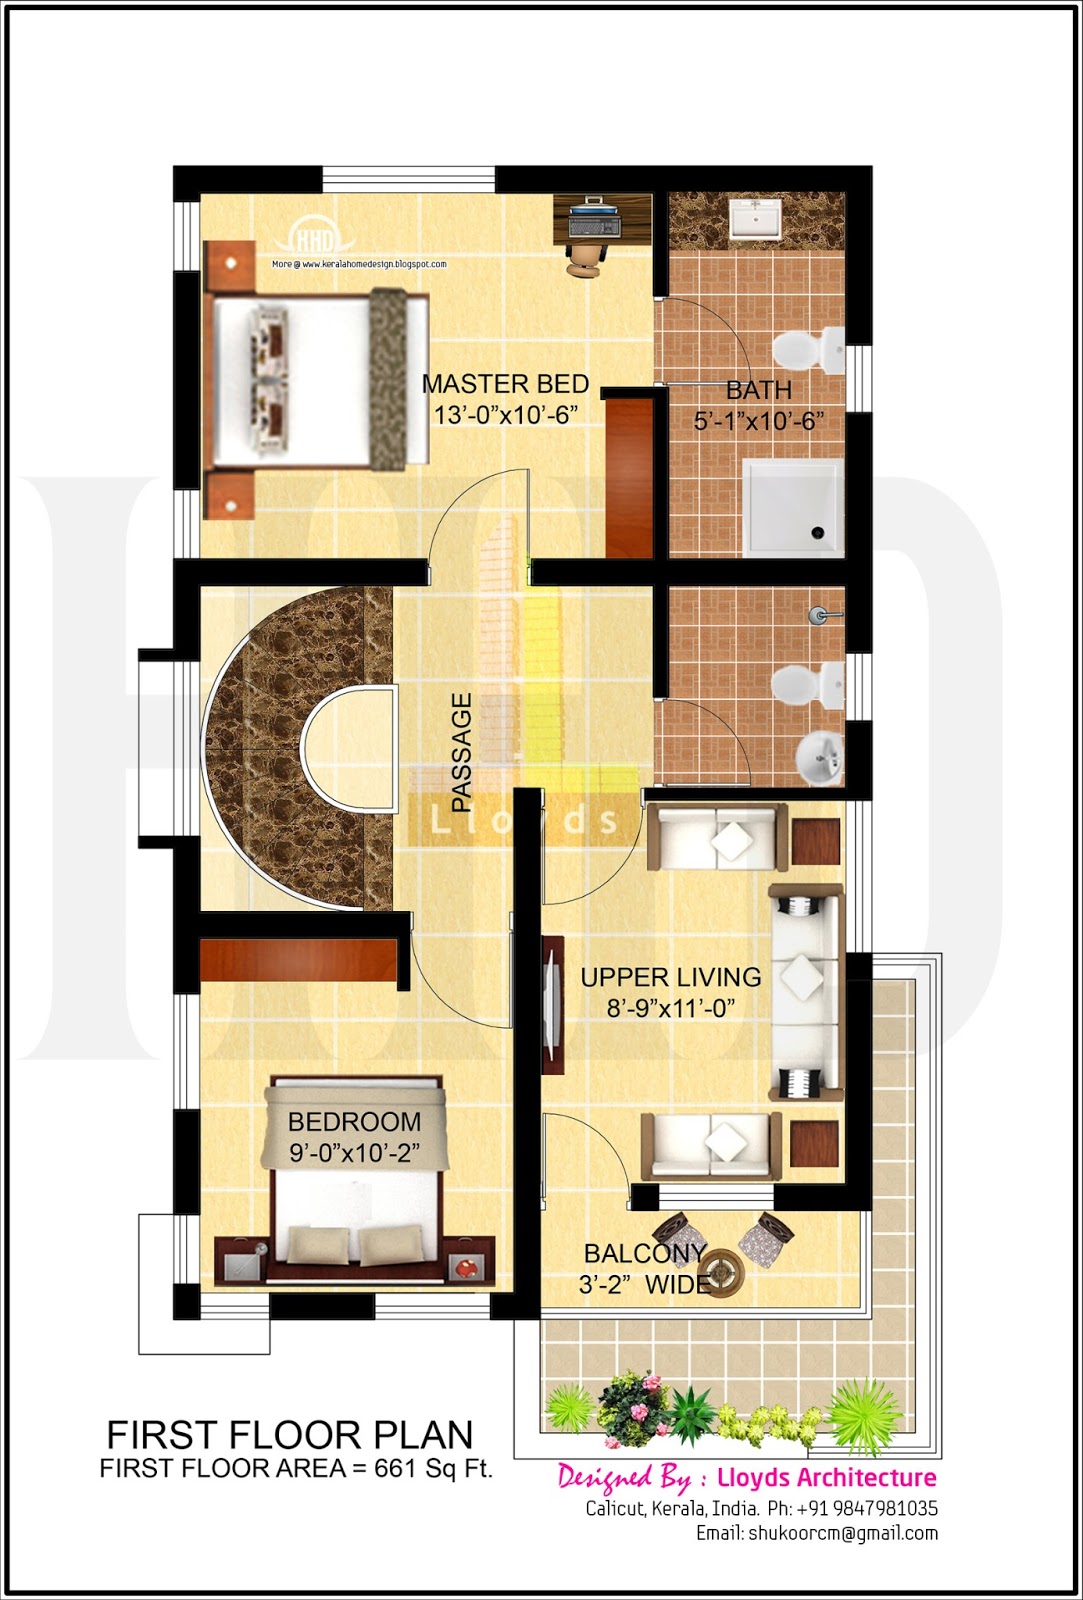 4 bedroom  house  plan  in less than 3 cents  Kerala home  